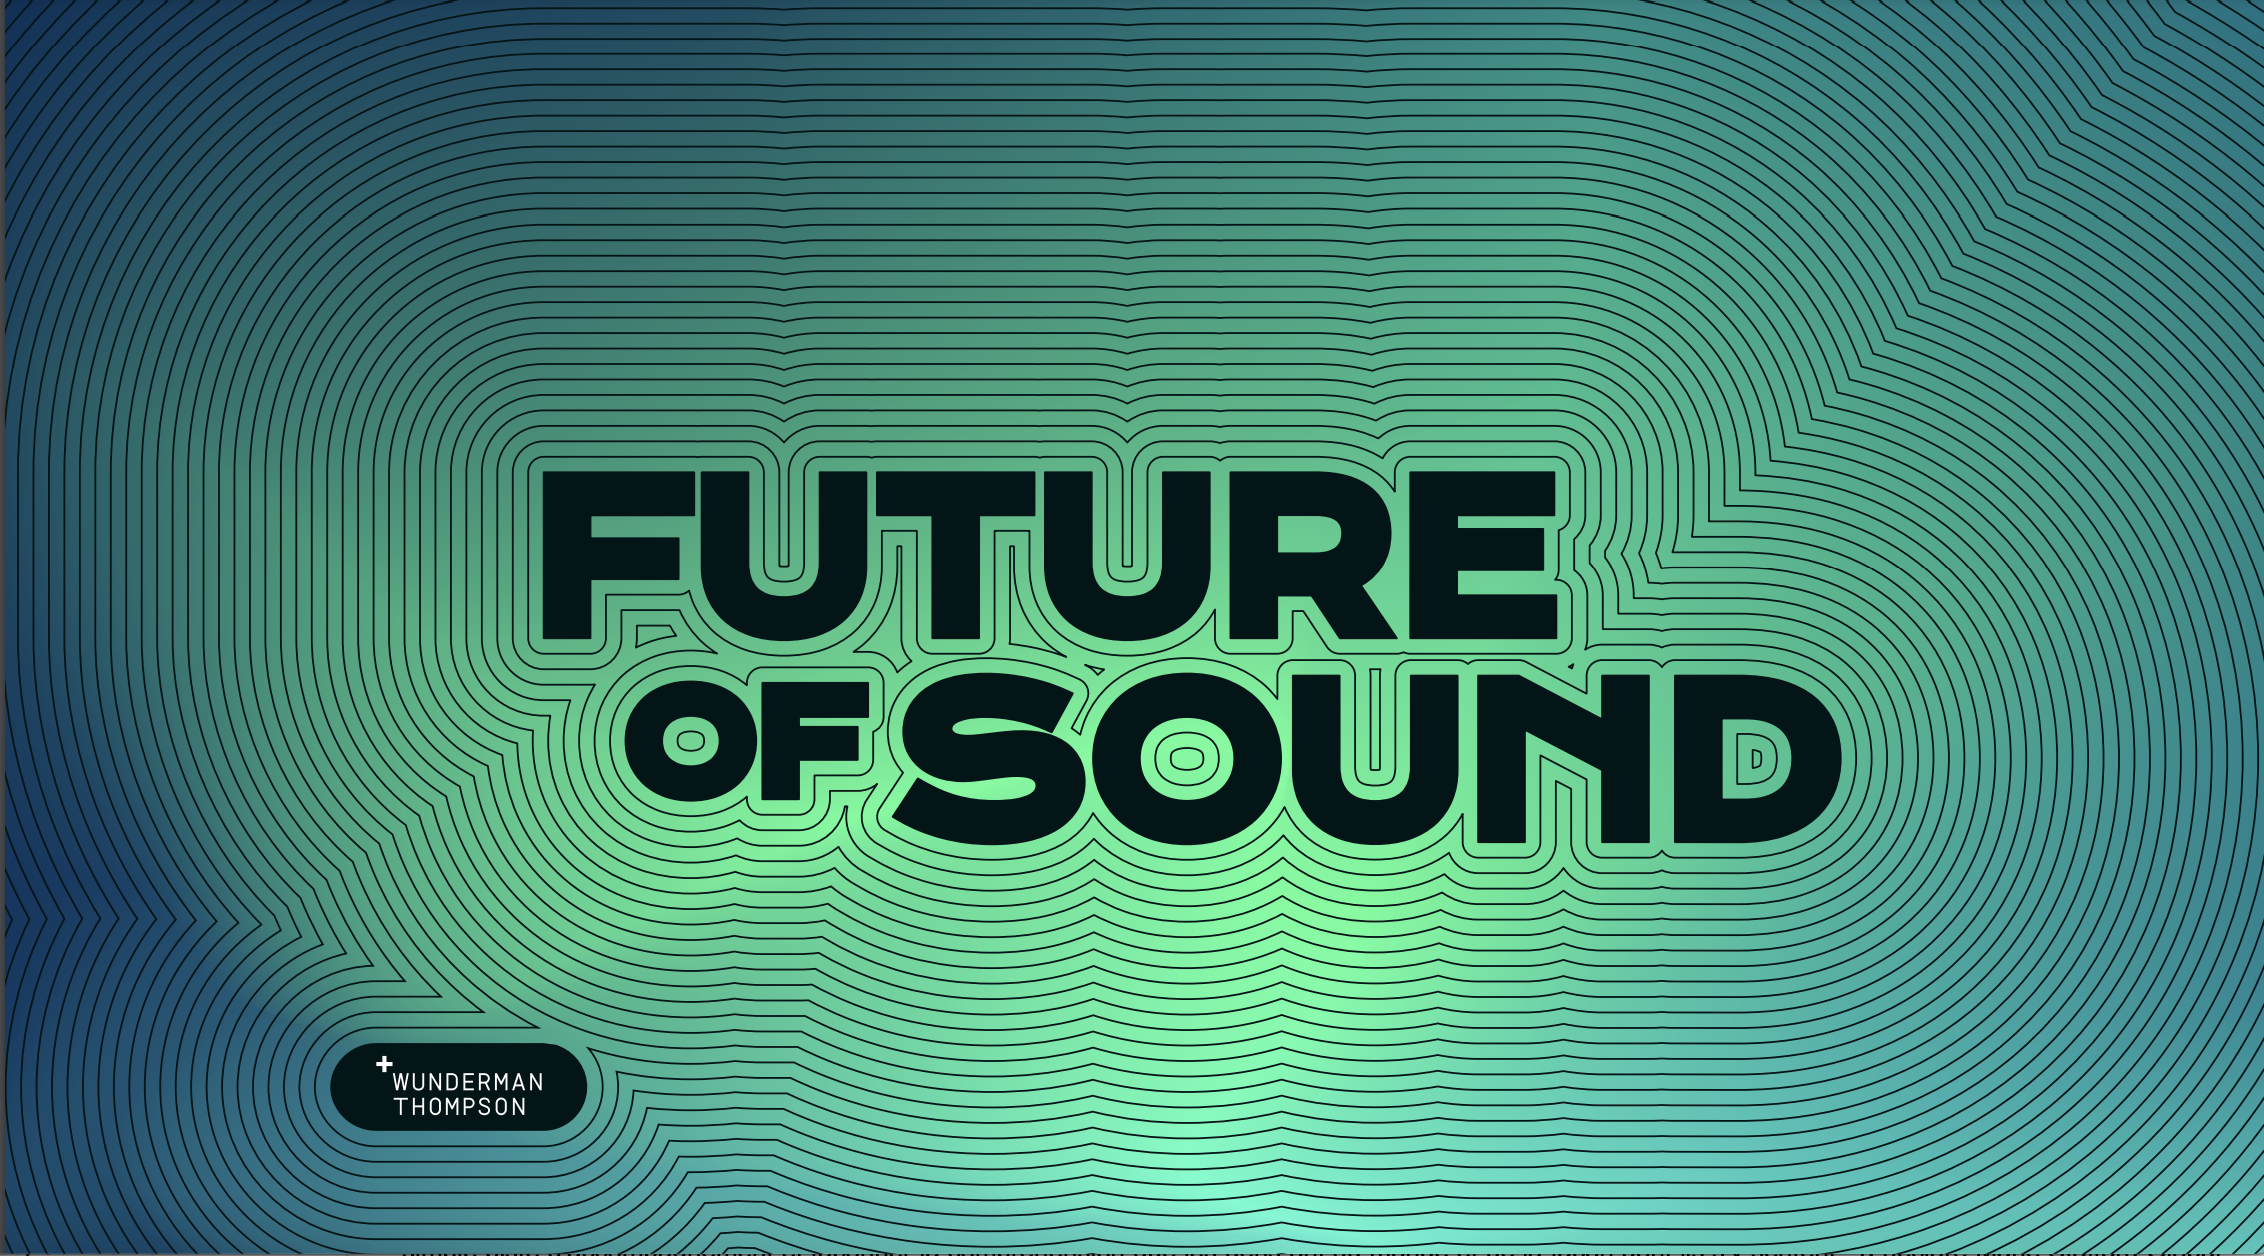 Wunderman Thompson et Spotify Advertising dévoilent The Future of Sound